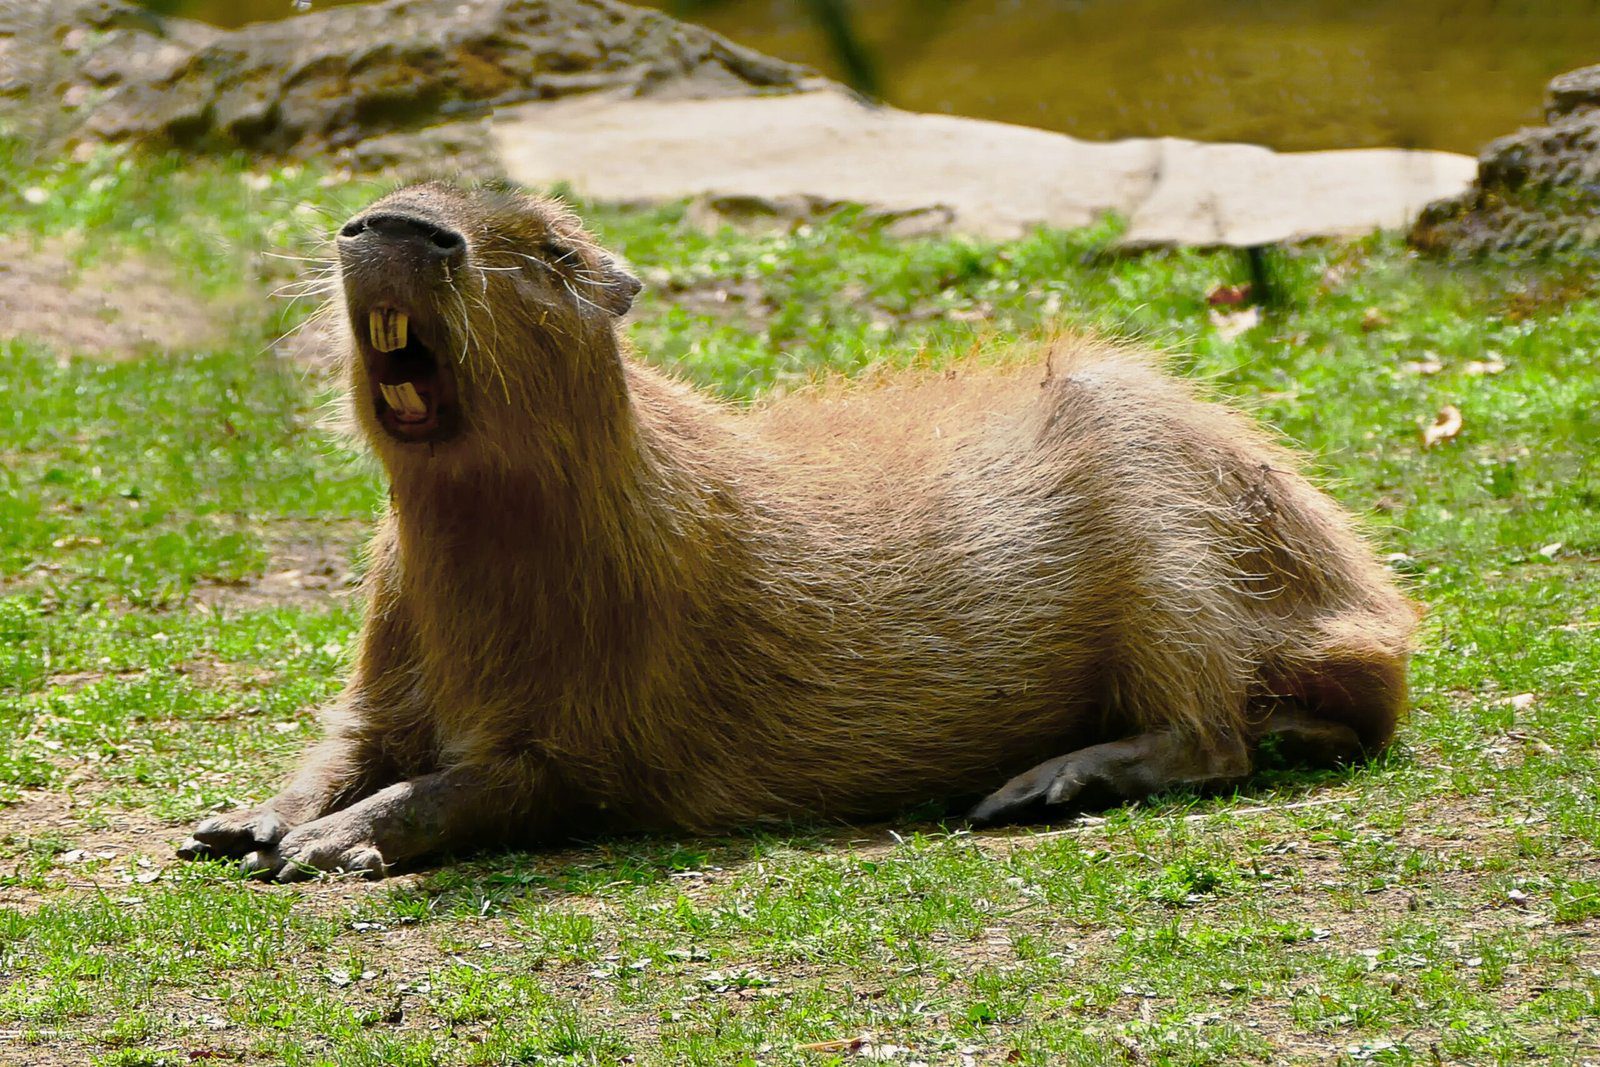 Is owning a capybara legal in Massachusetts?